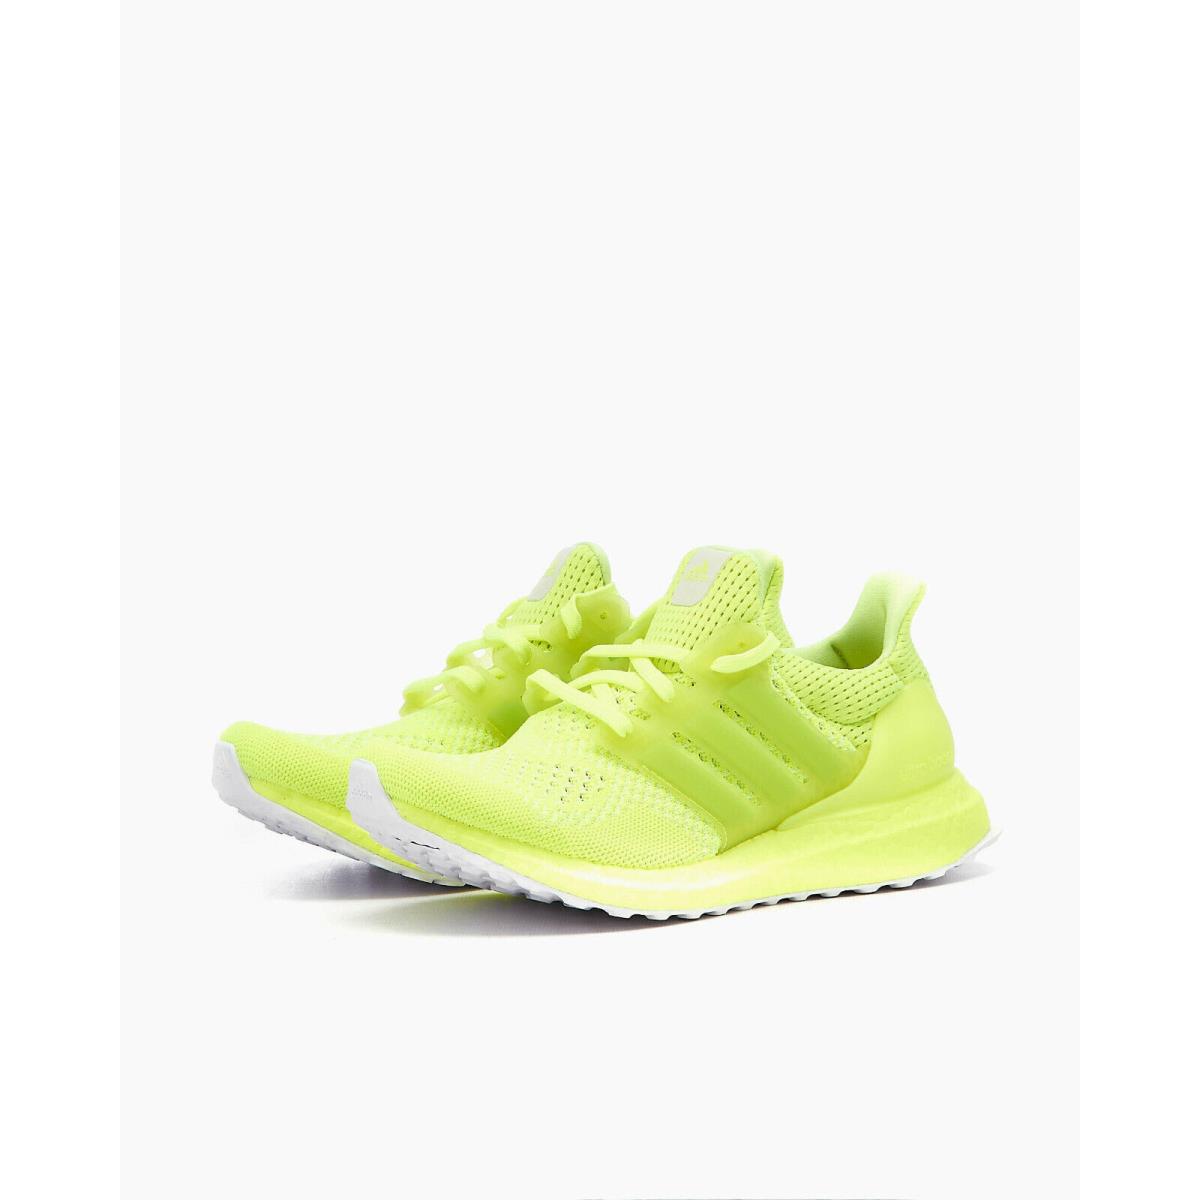 Adidas shoes UltraBoost DNA - Solar Yellow / Solar Yellow / Hi-Res Yellow , Core Black/Core Black/Footwear White Manufacturer 1